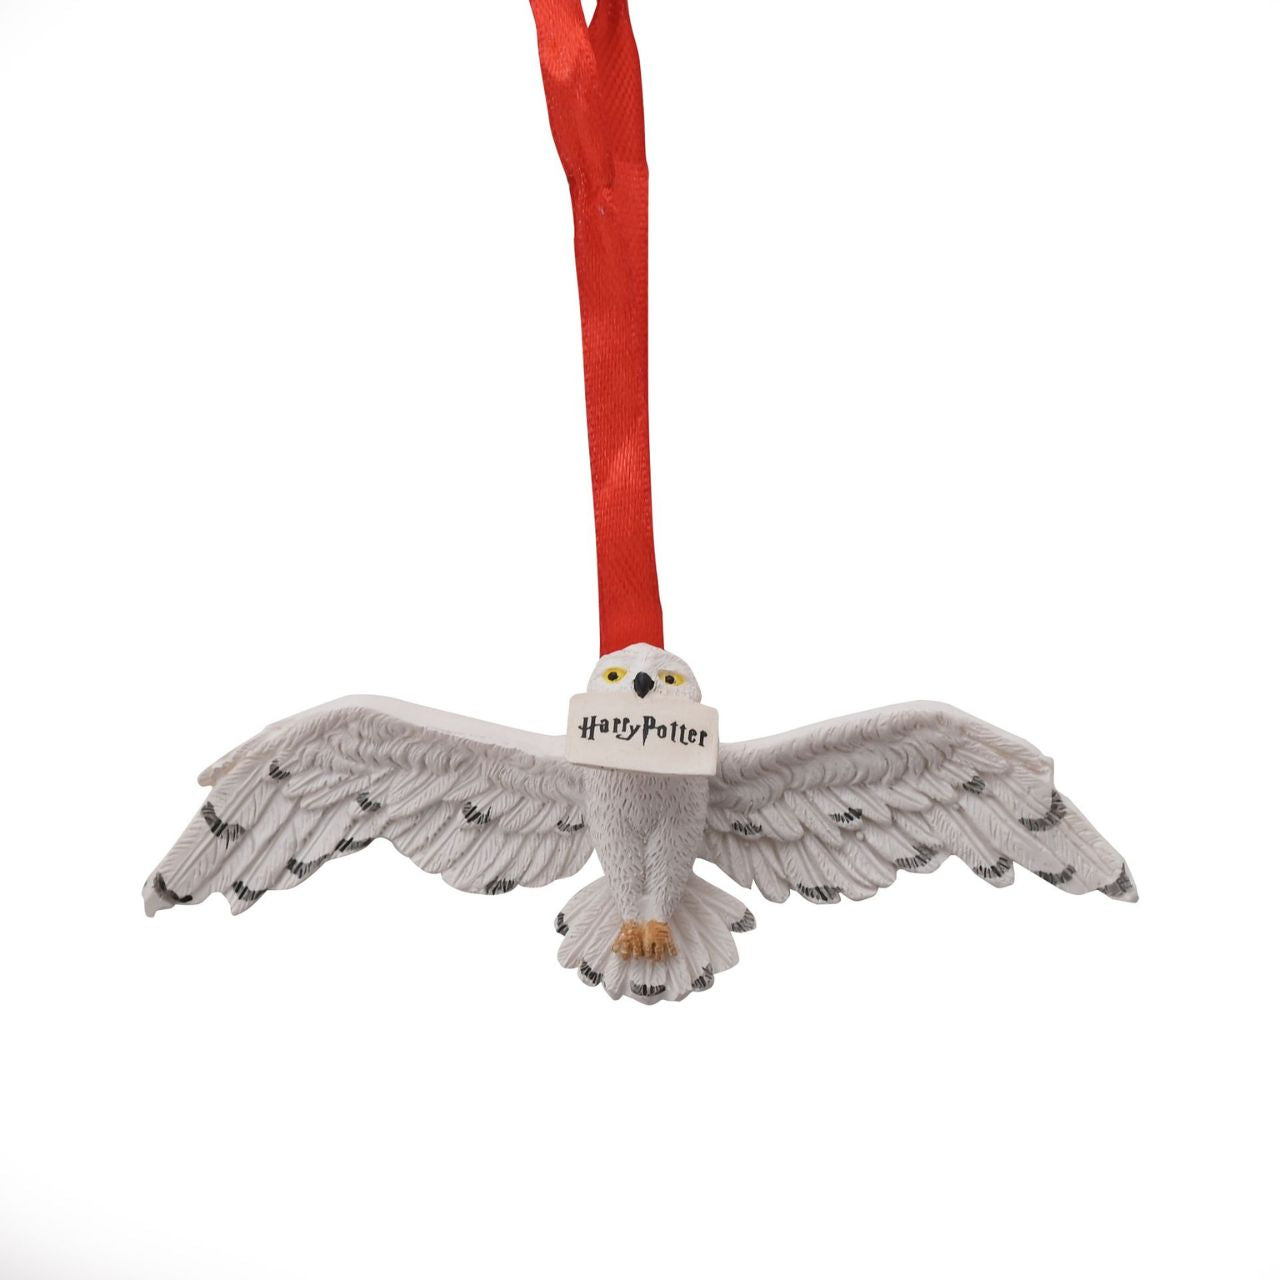 Harry Potter Resin Tree Decoration - Owl  These ornaments would make a delightfully magical Christmas decoration option this festive season. With a letter, an owl, and a key, this set would look wonderful hanging on any potterhead's tree.